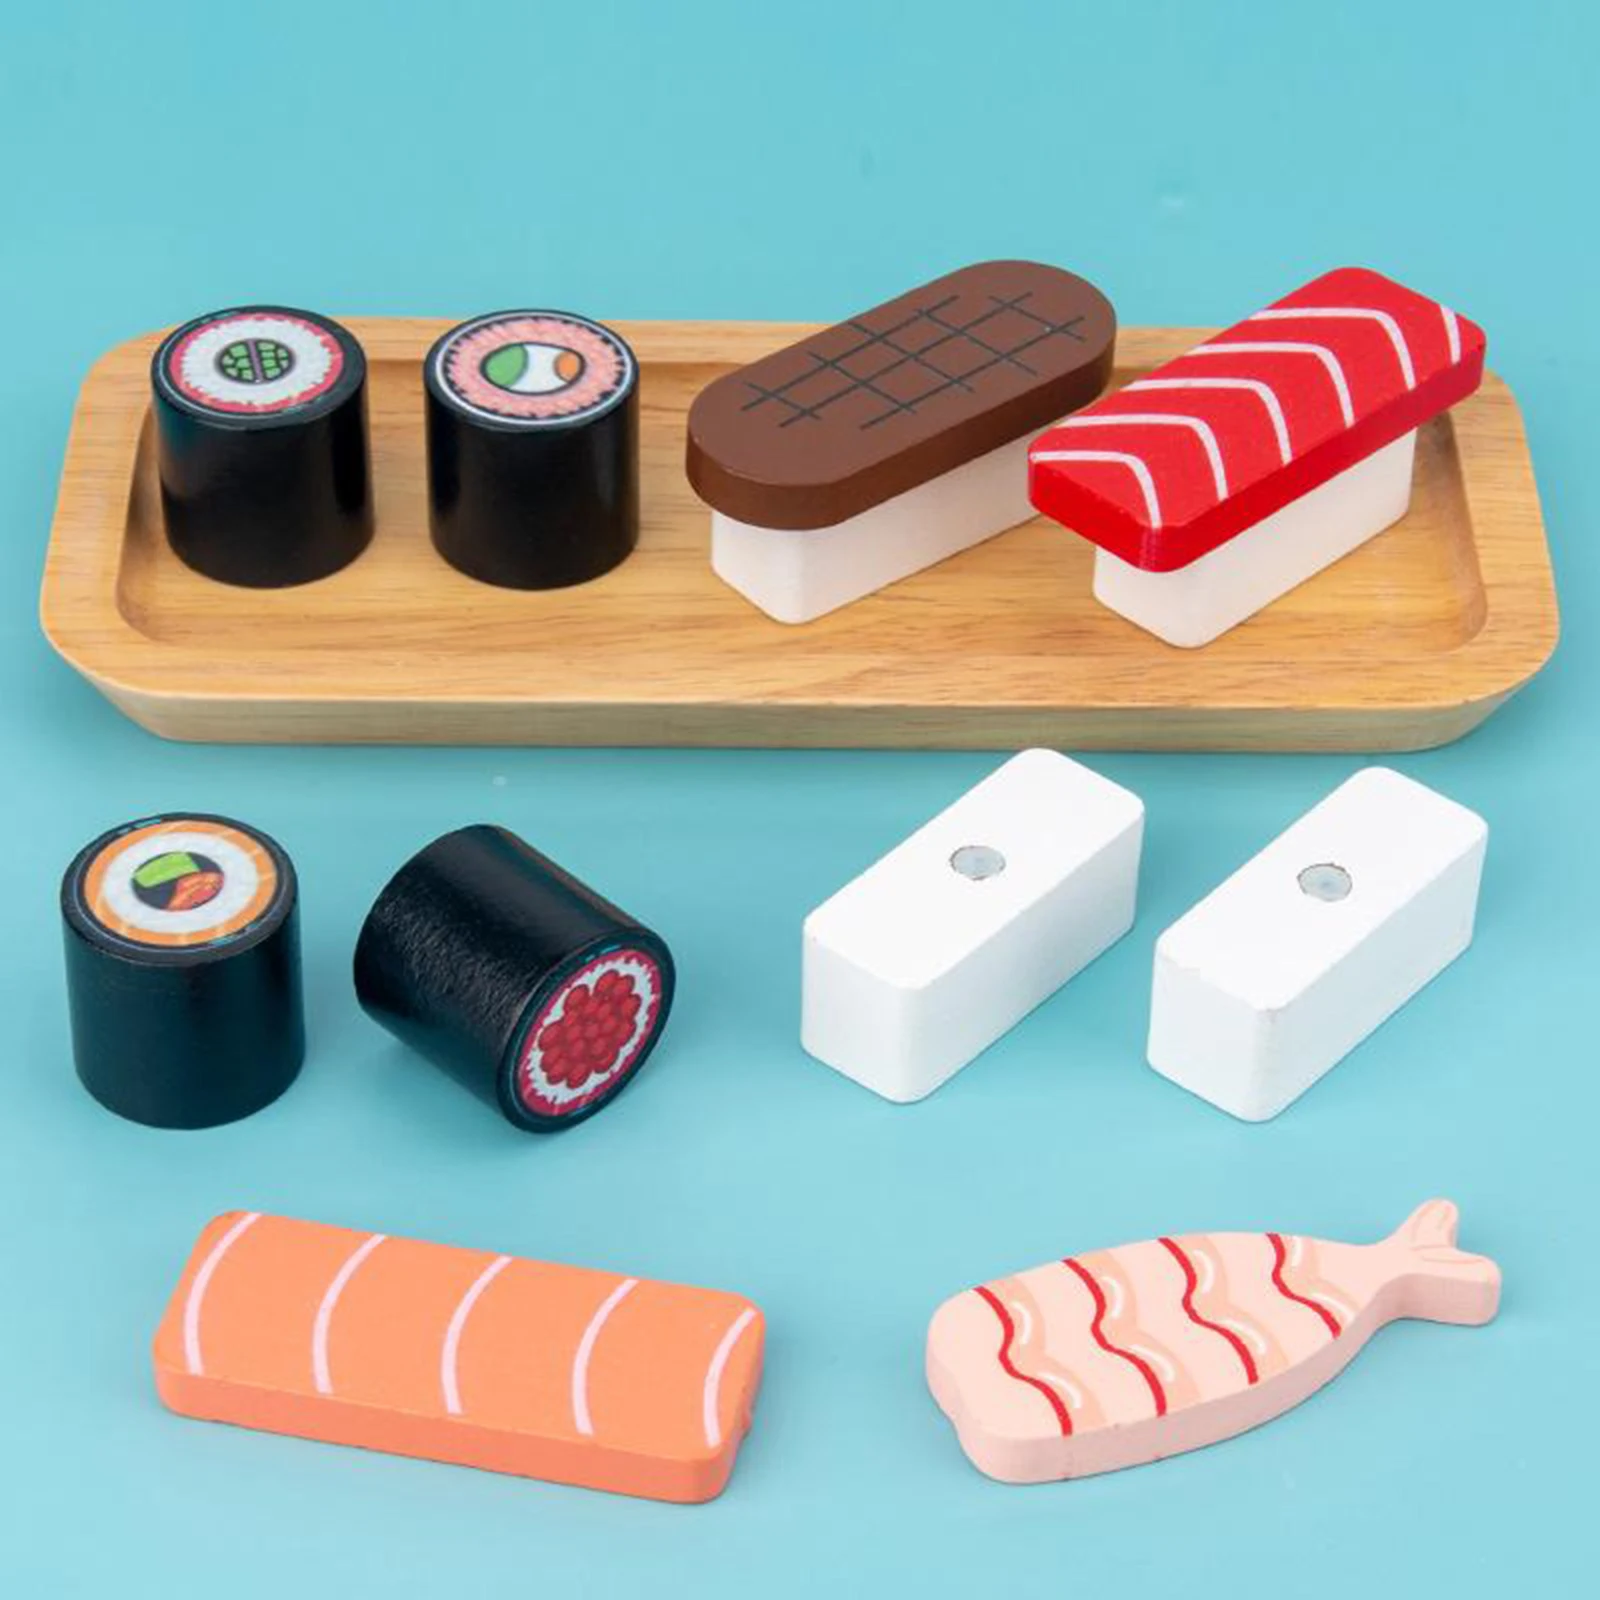 Wooden Sushi Set play food sets for kids kitchen Play Toys Kitchen Role Pretend 